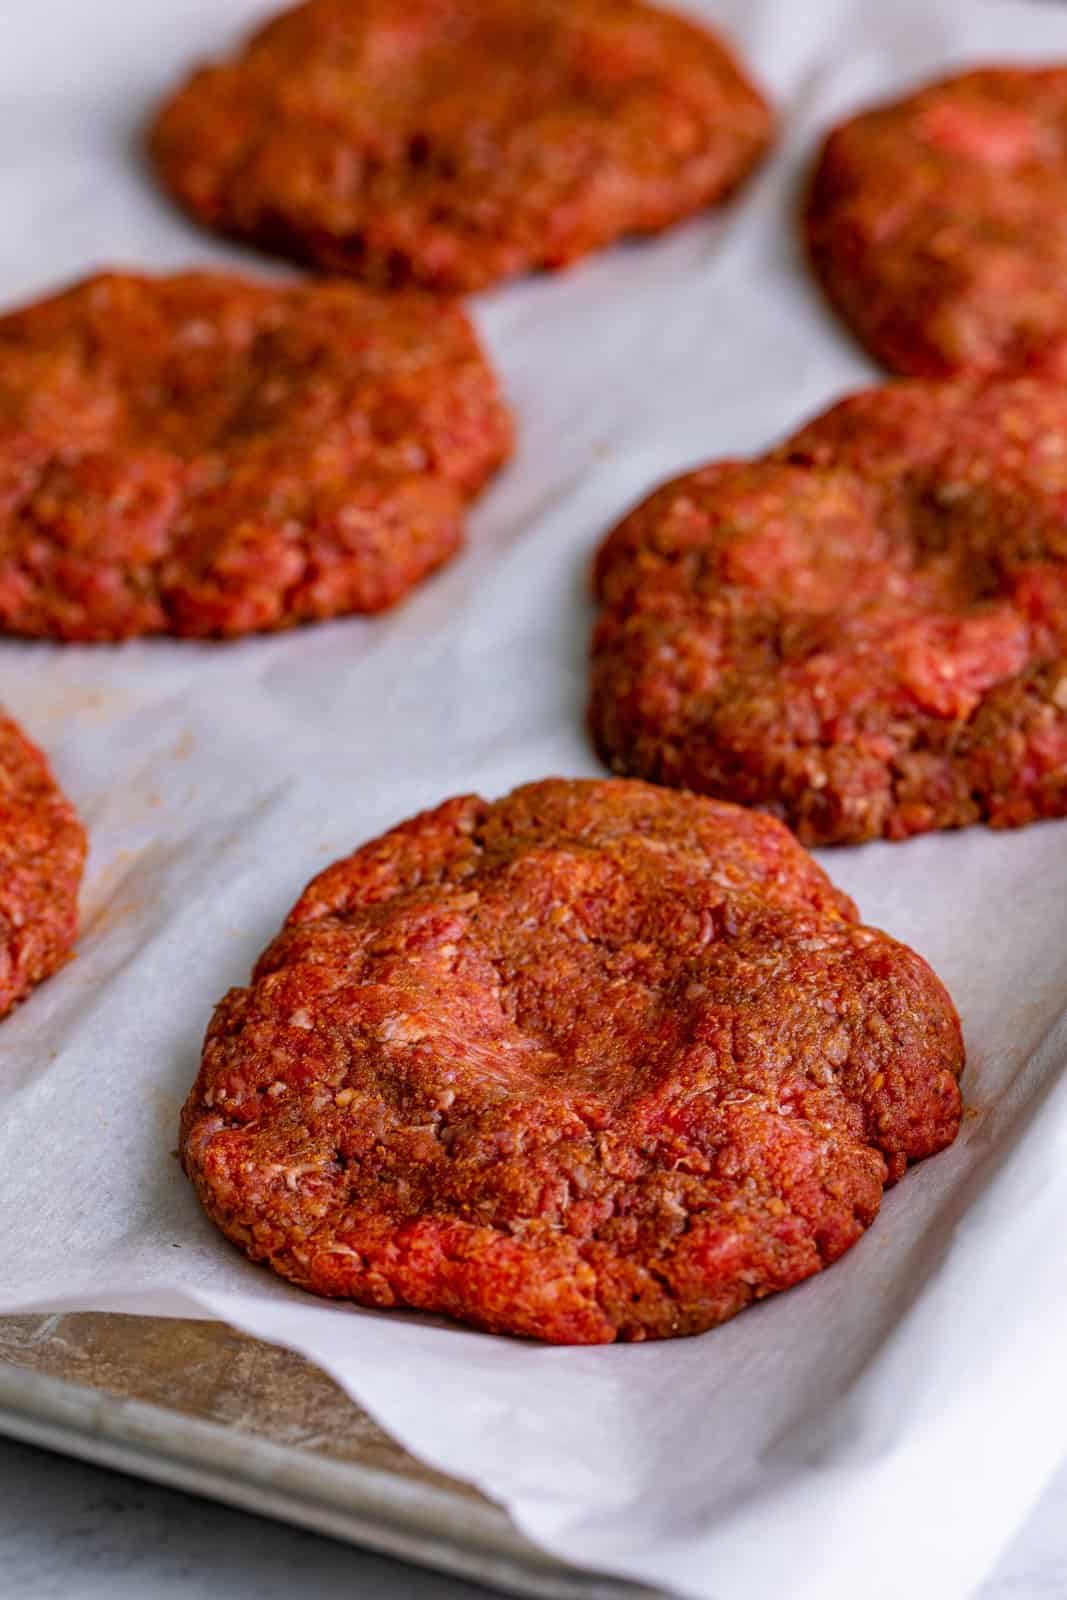 Burgers formed into patties with indent in the middle.